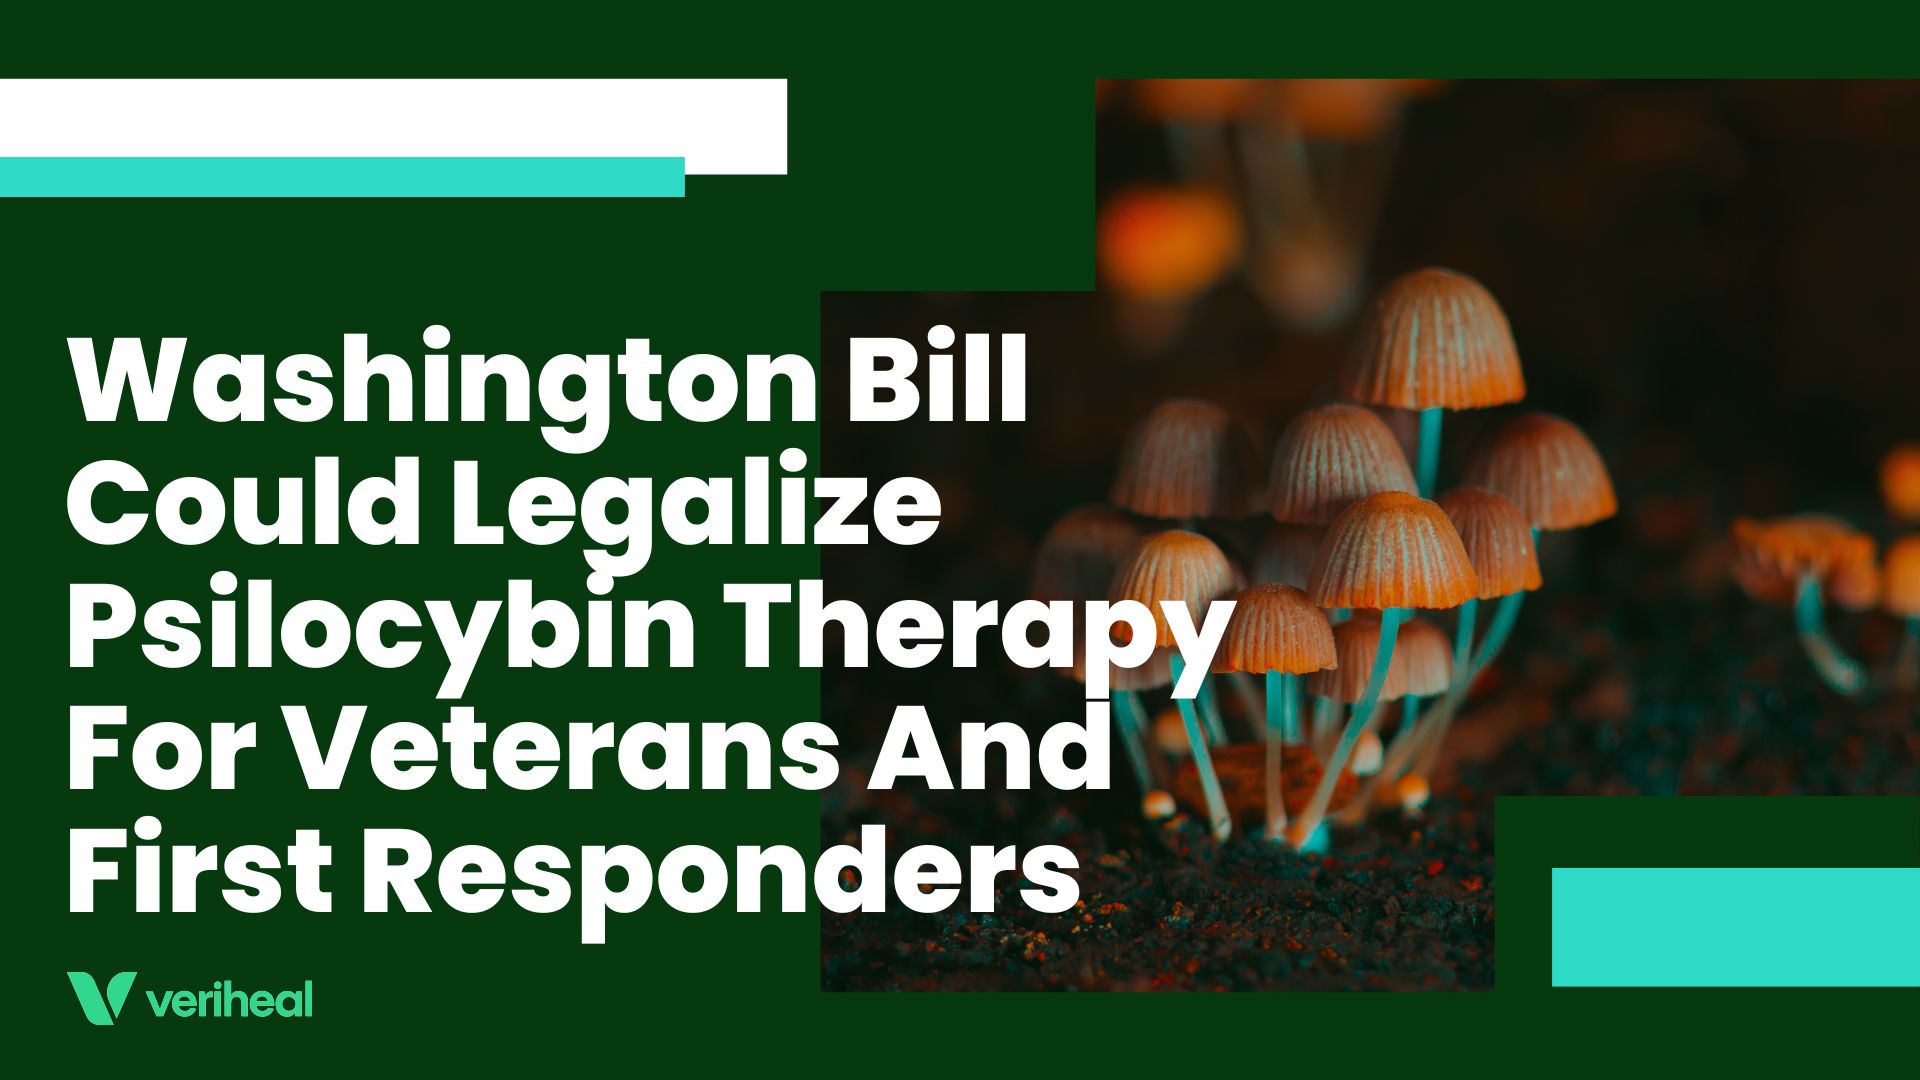 Washington Bill Could Legalize Psilocybin Therapy For Veterans And First Responders